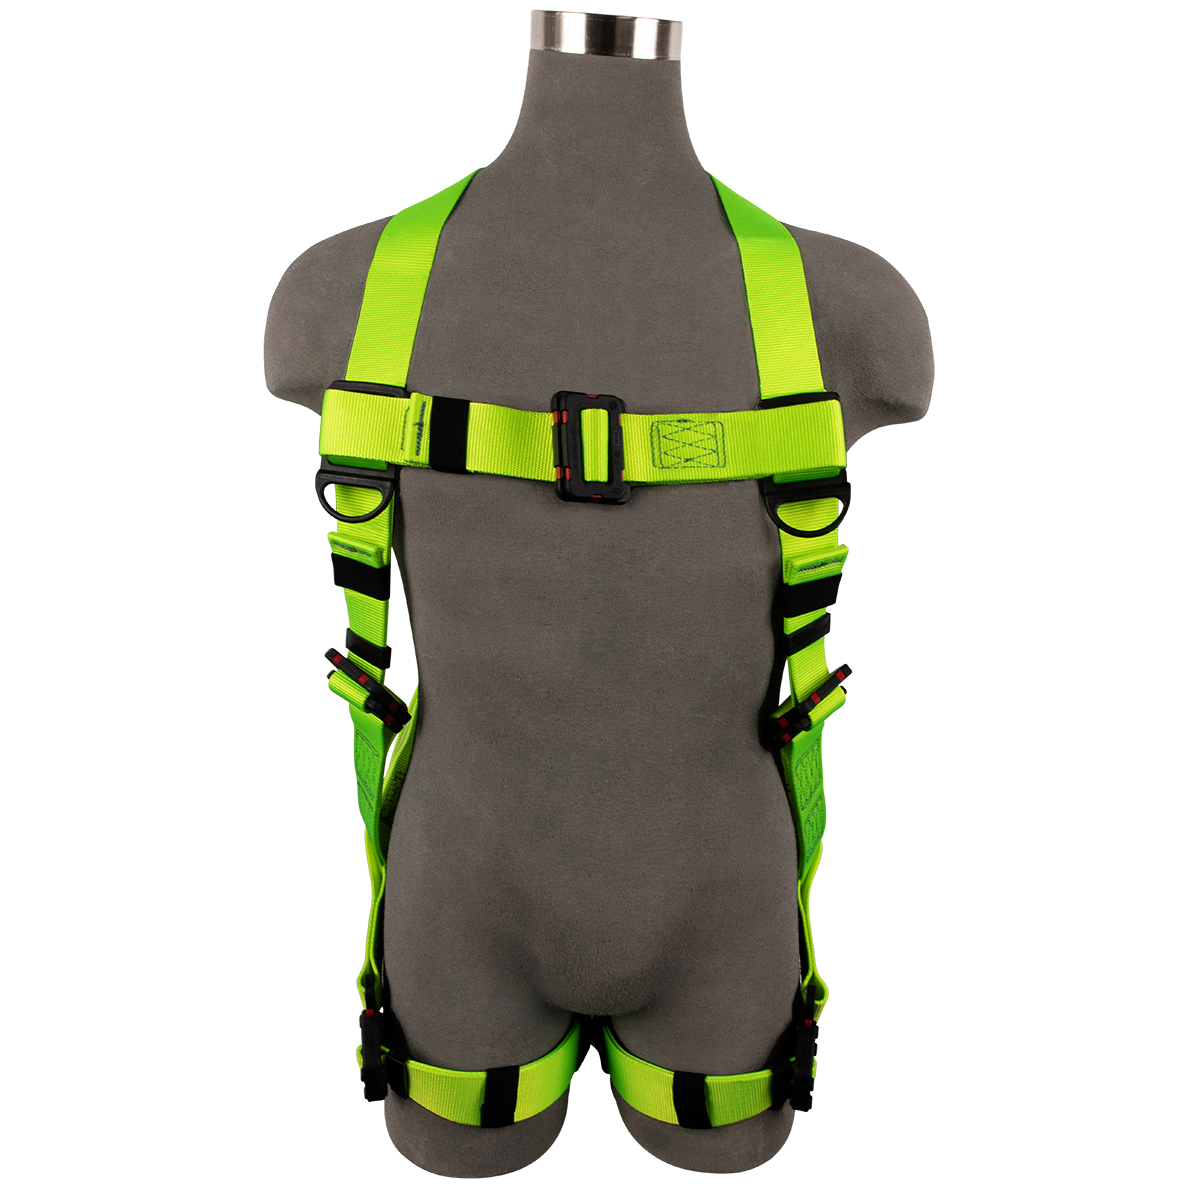 SAFEWAZE PRO+ Arc Flash Dielectric Harness with Pass through Dielectric on Chest and Quick-Connect Legs with Soft Loop Back D-Ring: X-Small